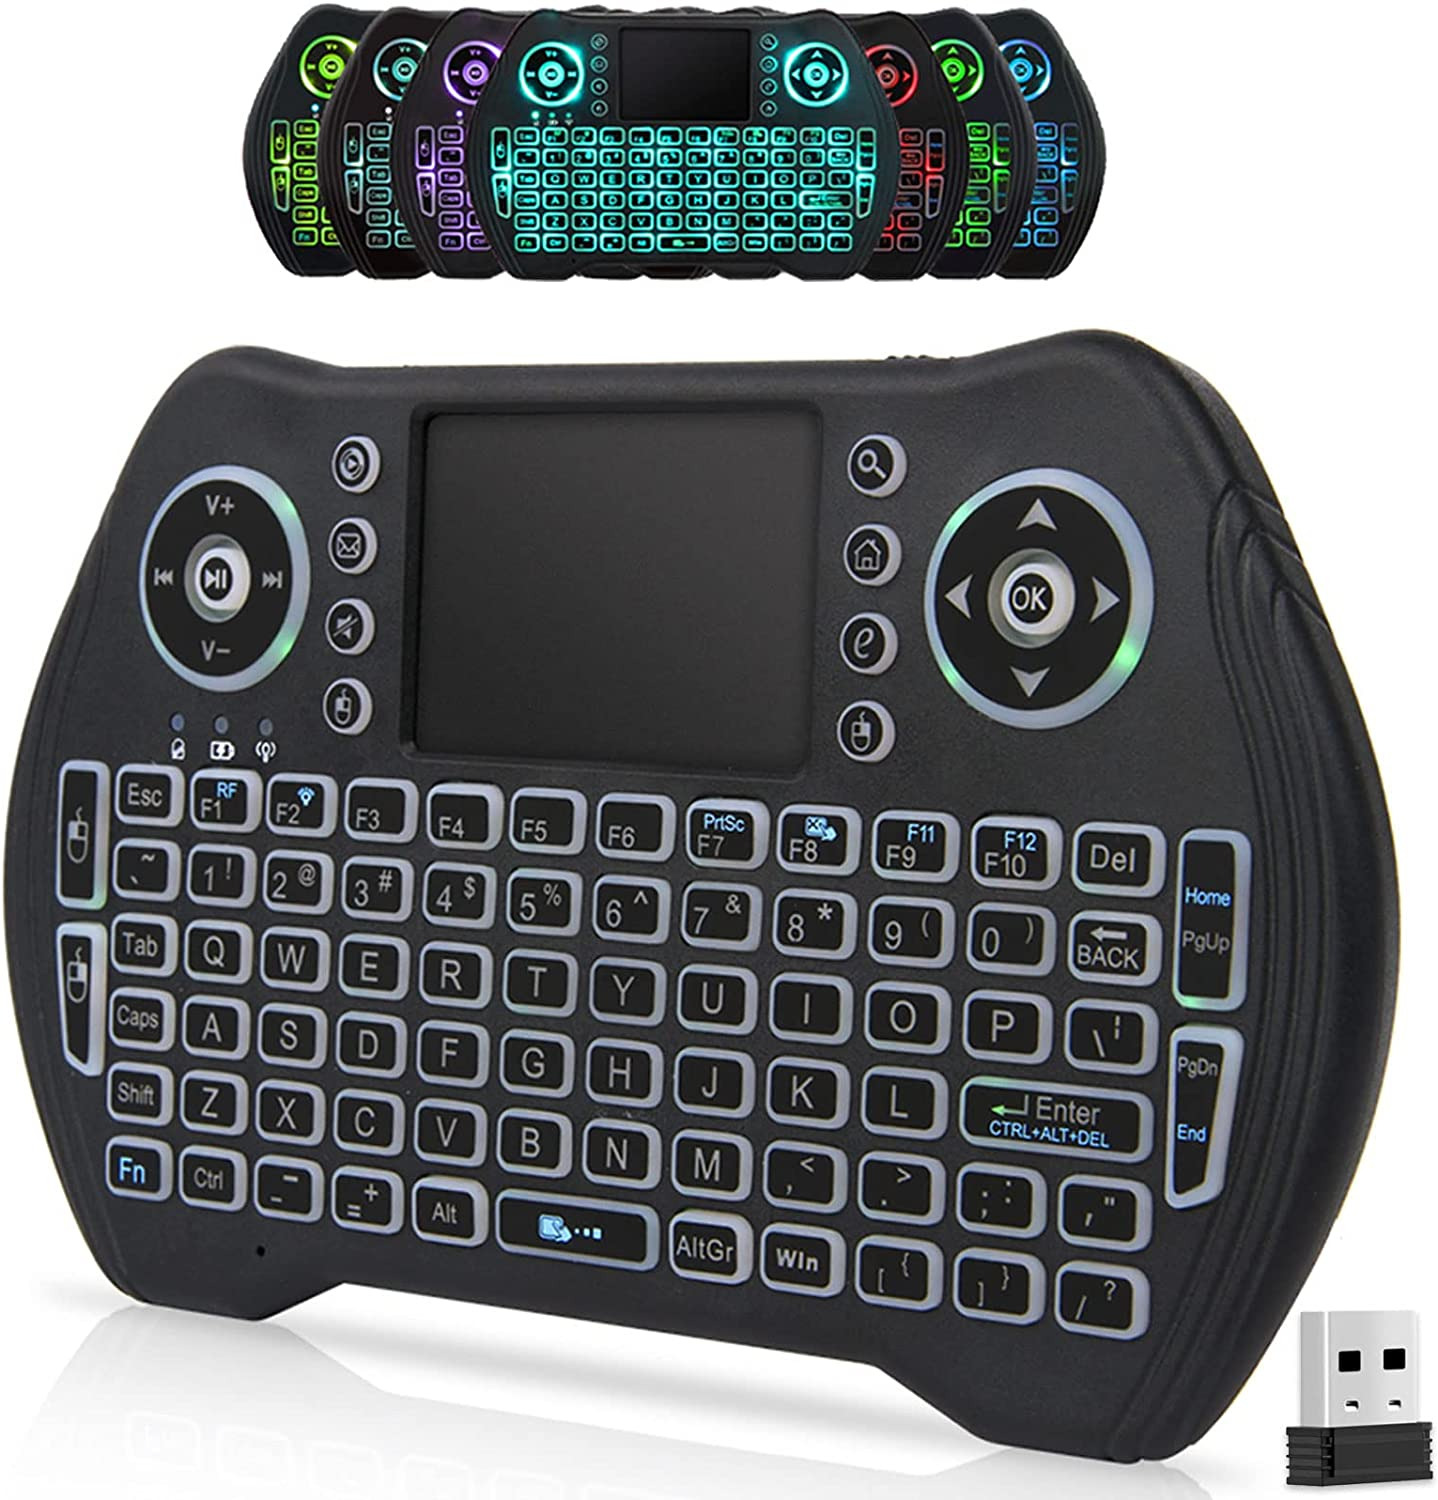 Mini Wireless Keyboard Remote Control with Touchpad Mouse Combo, Backlit 2.4Ghz